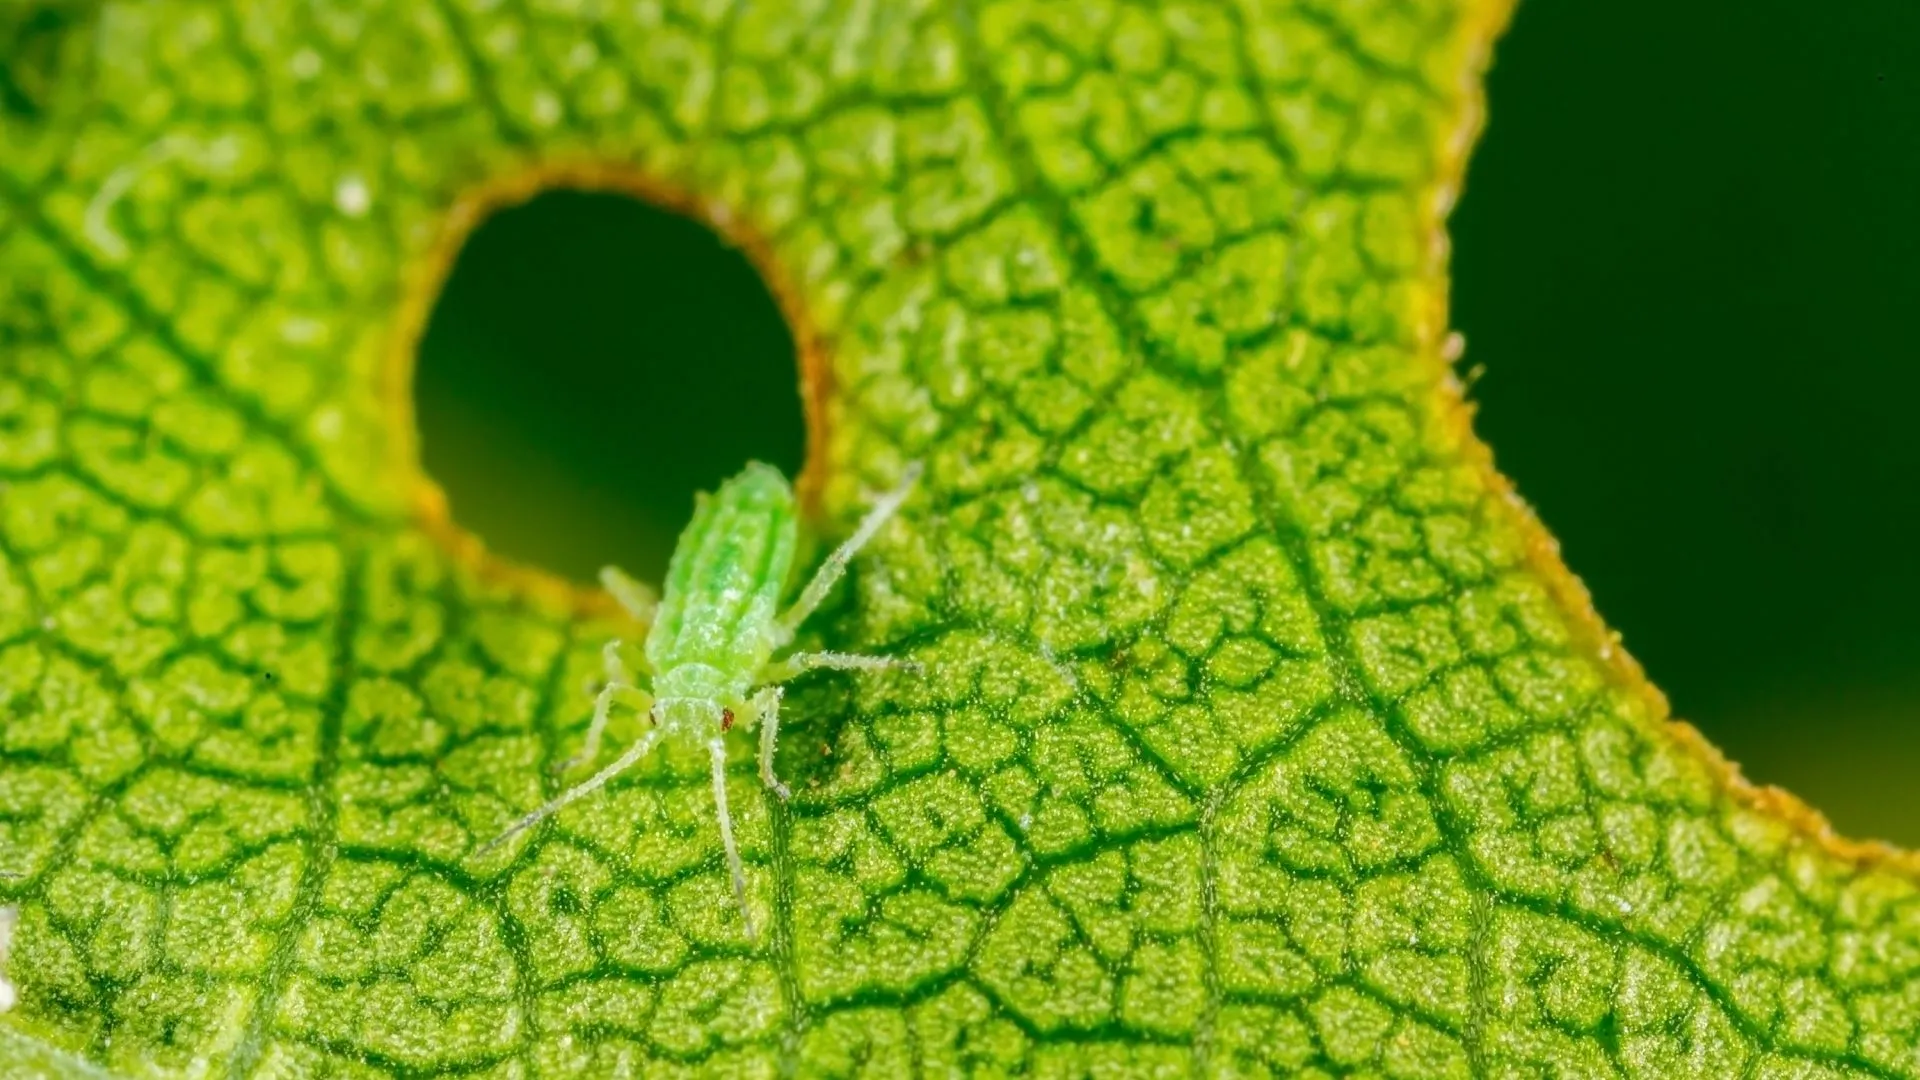 Brace Yourself for Aphid Season - Protect Your Lawn & Landscape!